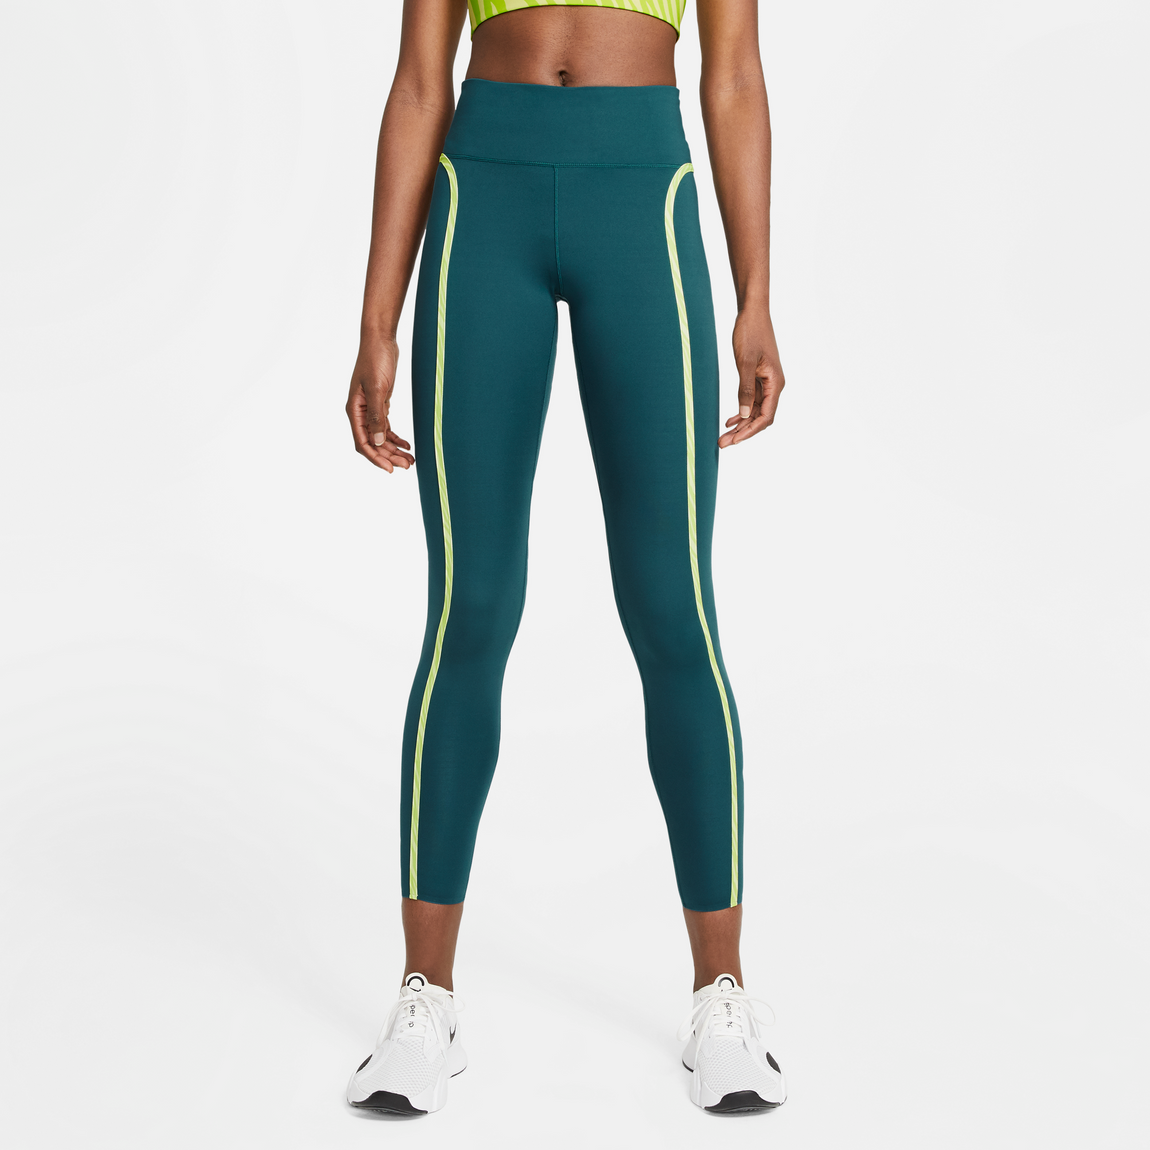 Nike One Luxe Icon Clash Tights (Dark Teal Green) - Nike One Luxe Icon Clash Tights (Dark Teal Green) - 